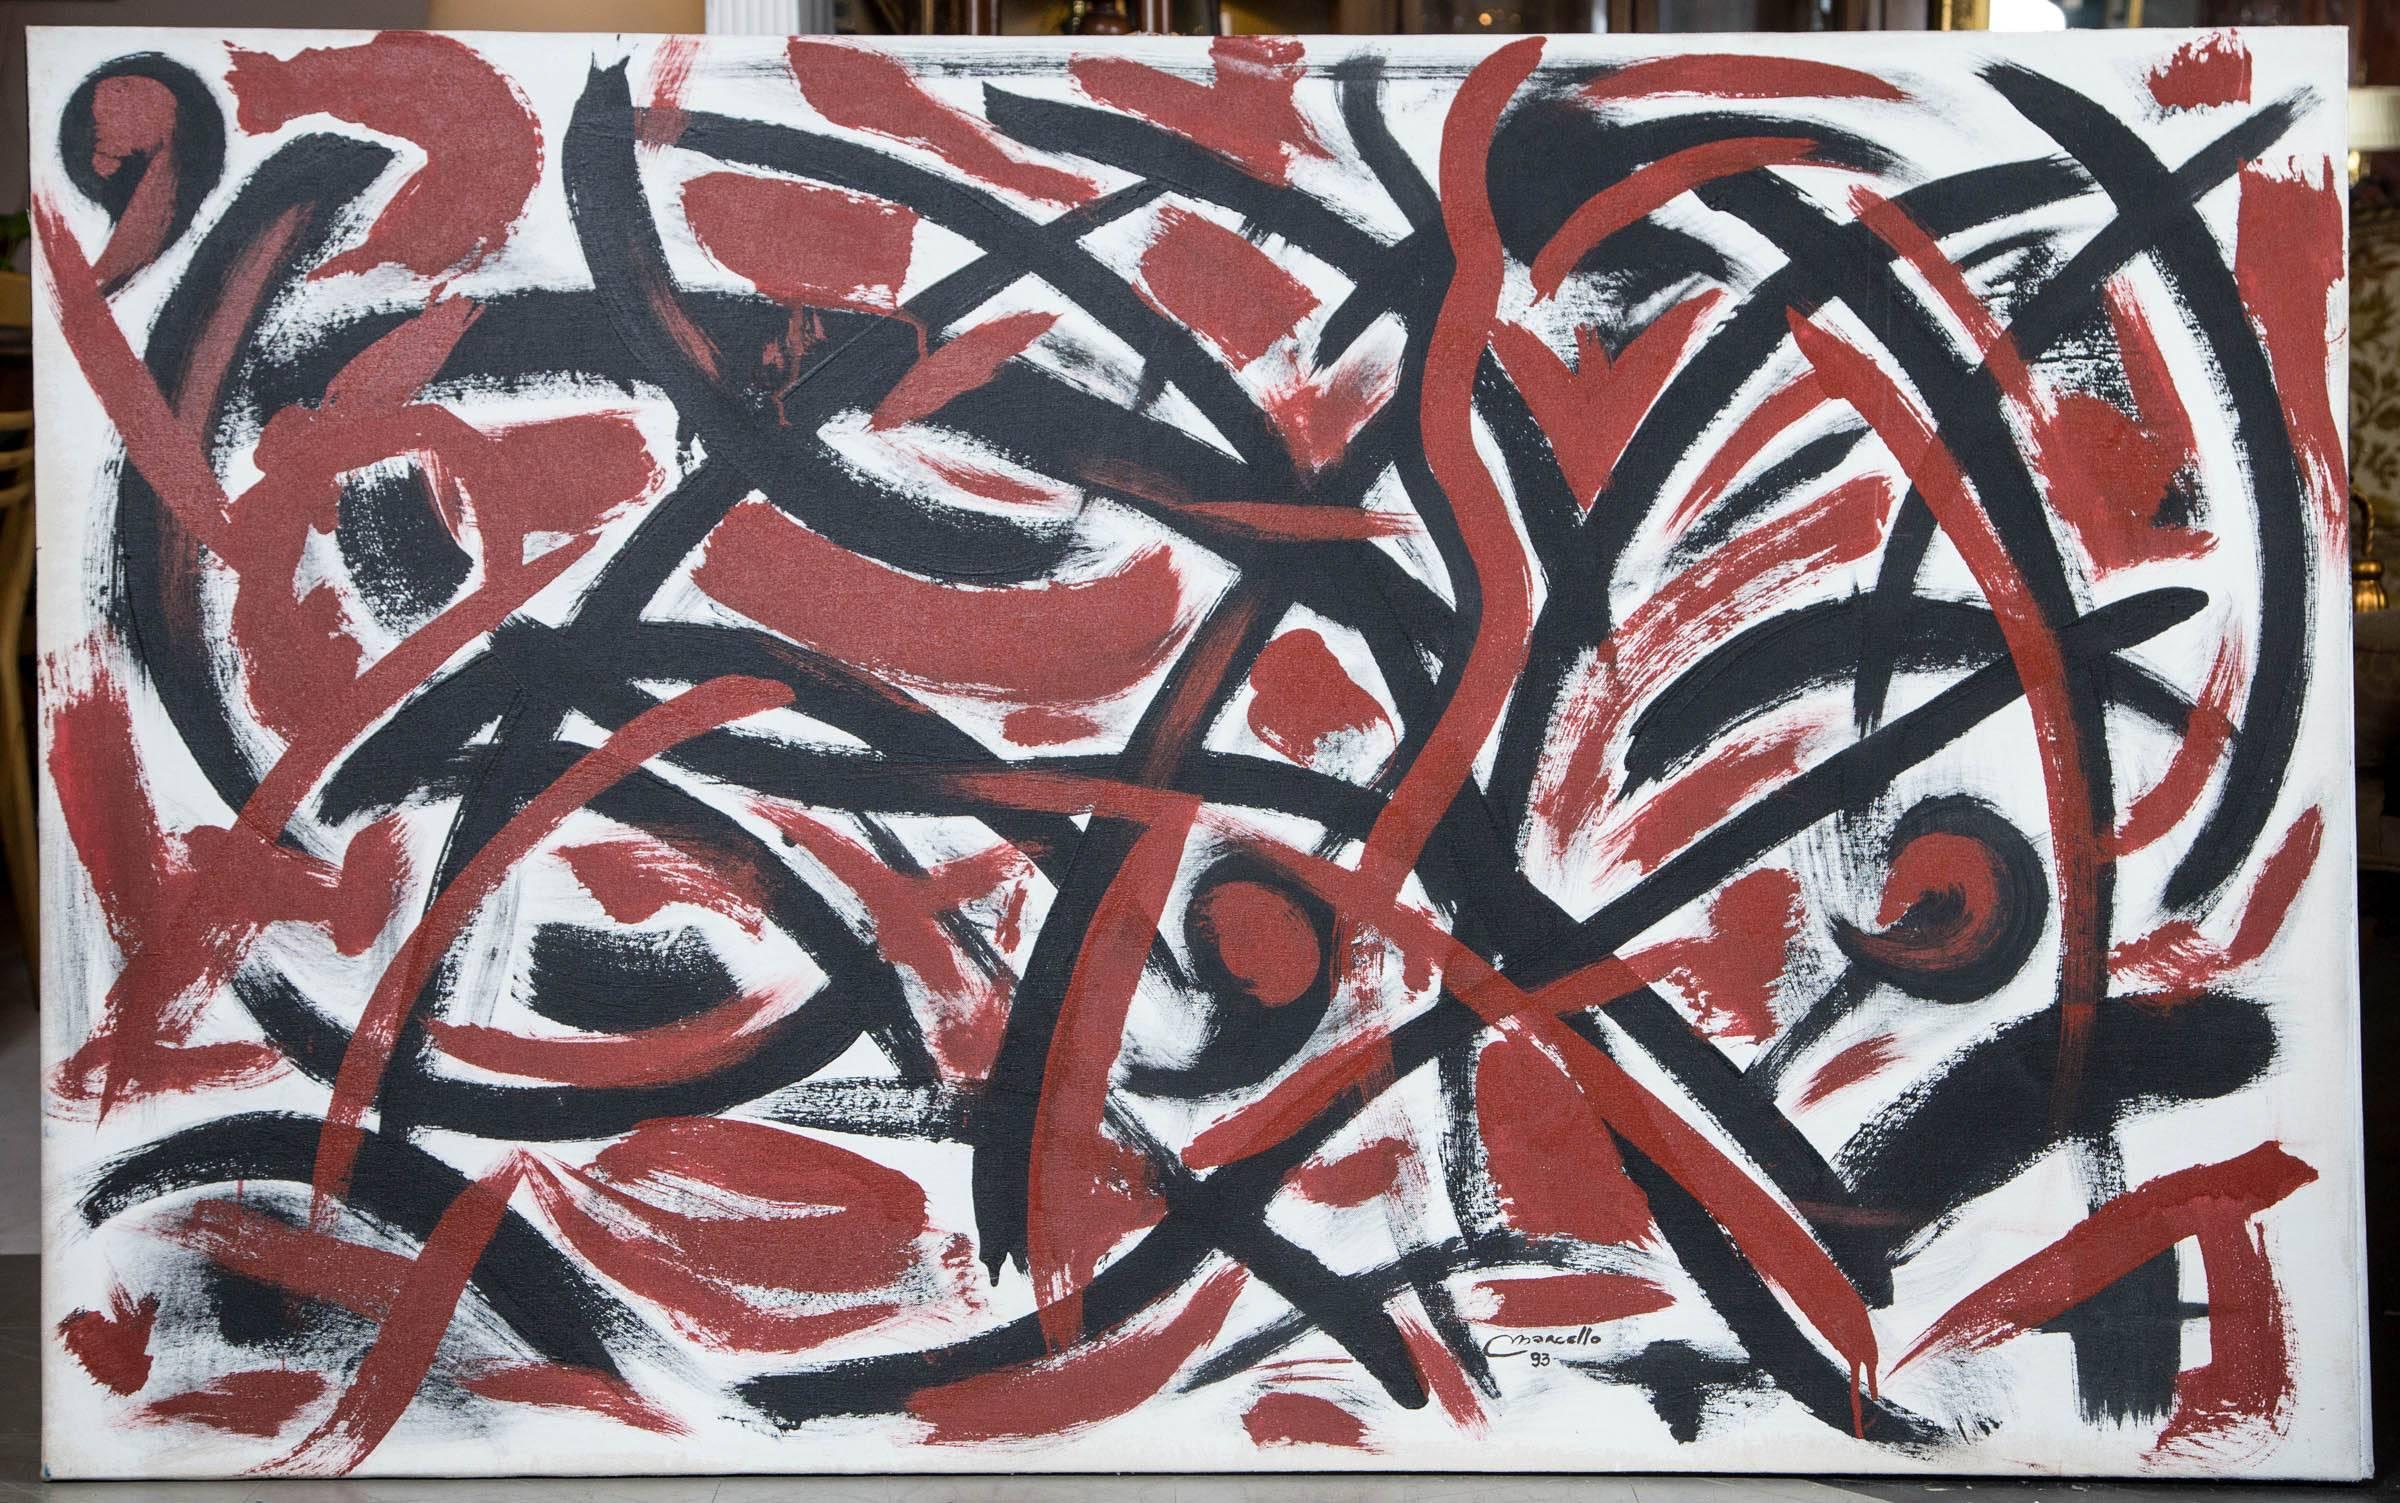 A large abstract painting with masterful free flow brush strokes much like the masters of the 1940s and 1950s. In all original condition (may be displayed vertical or horizontal).